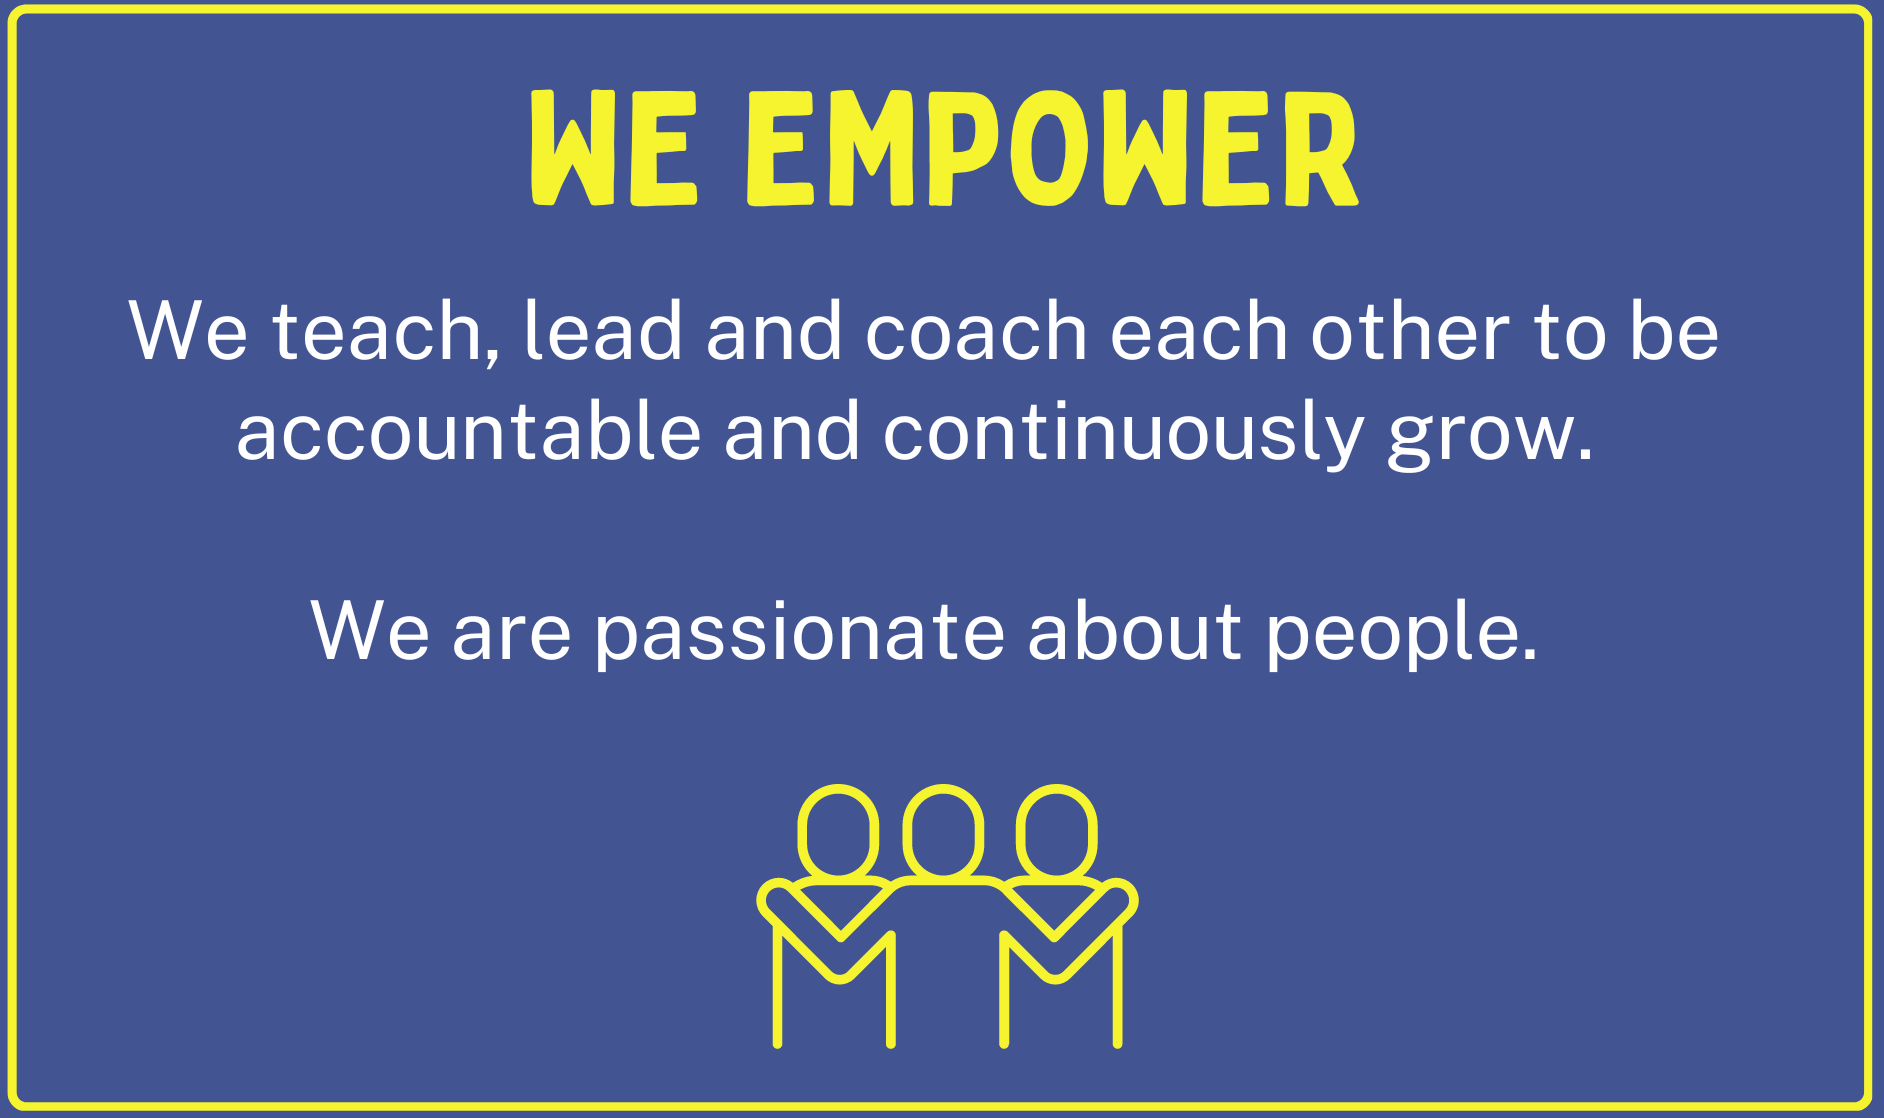 We Empower. We teach, lead and coach each other to be accountable and continuously grow. We are passionate about people.